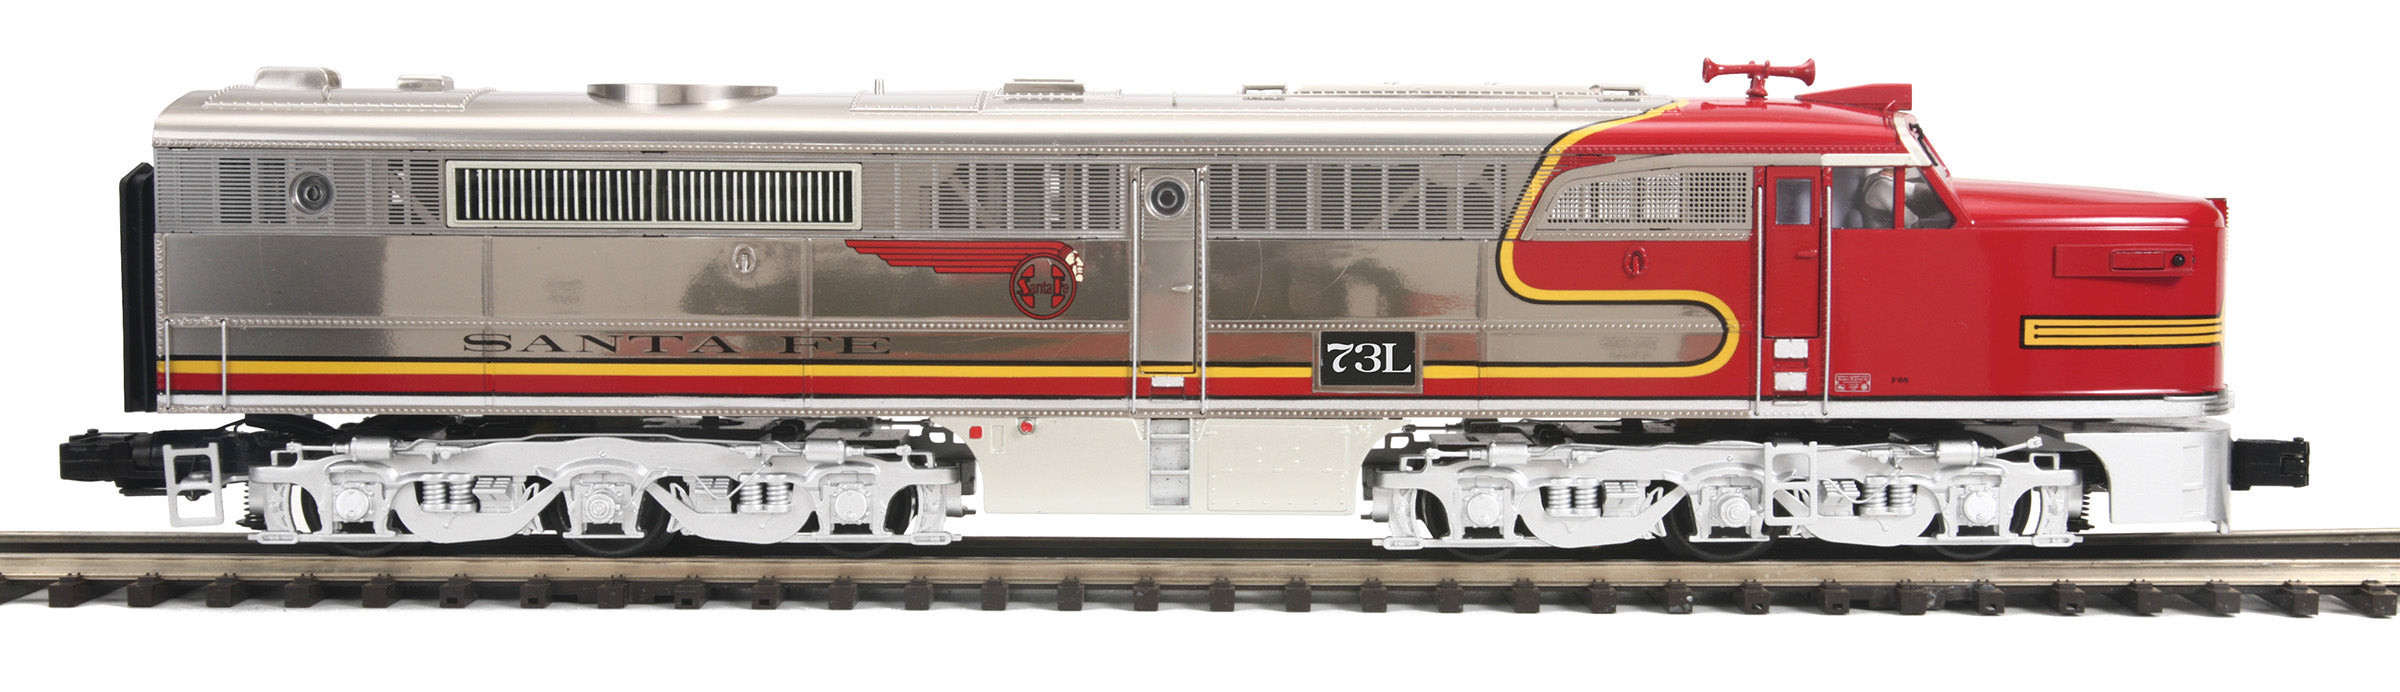 MTH 20-21873-4 - Alco PA A Unit Diesel Locomotive "Santa Fe" #73L w/ PS3 (Non-Powered) Plated